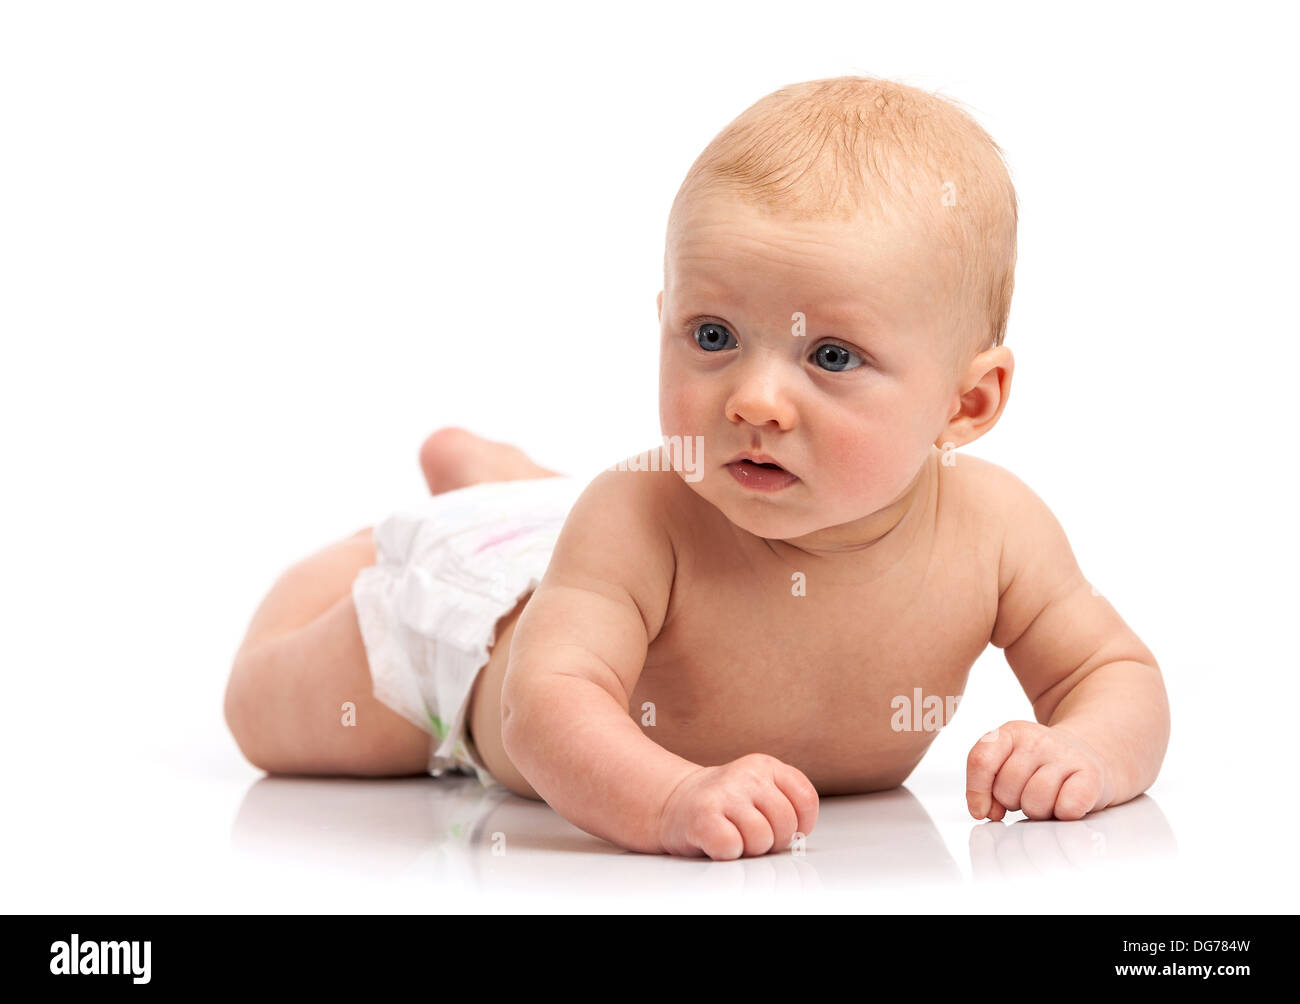 Cute baby boy lying on stomach over white background Banque D'Images